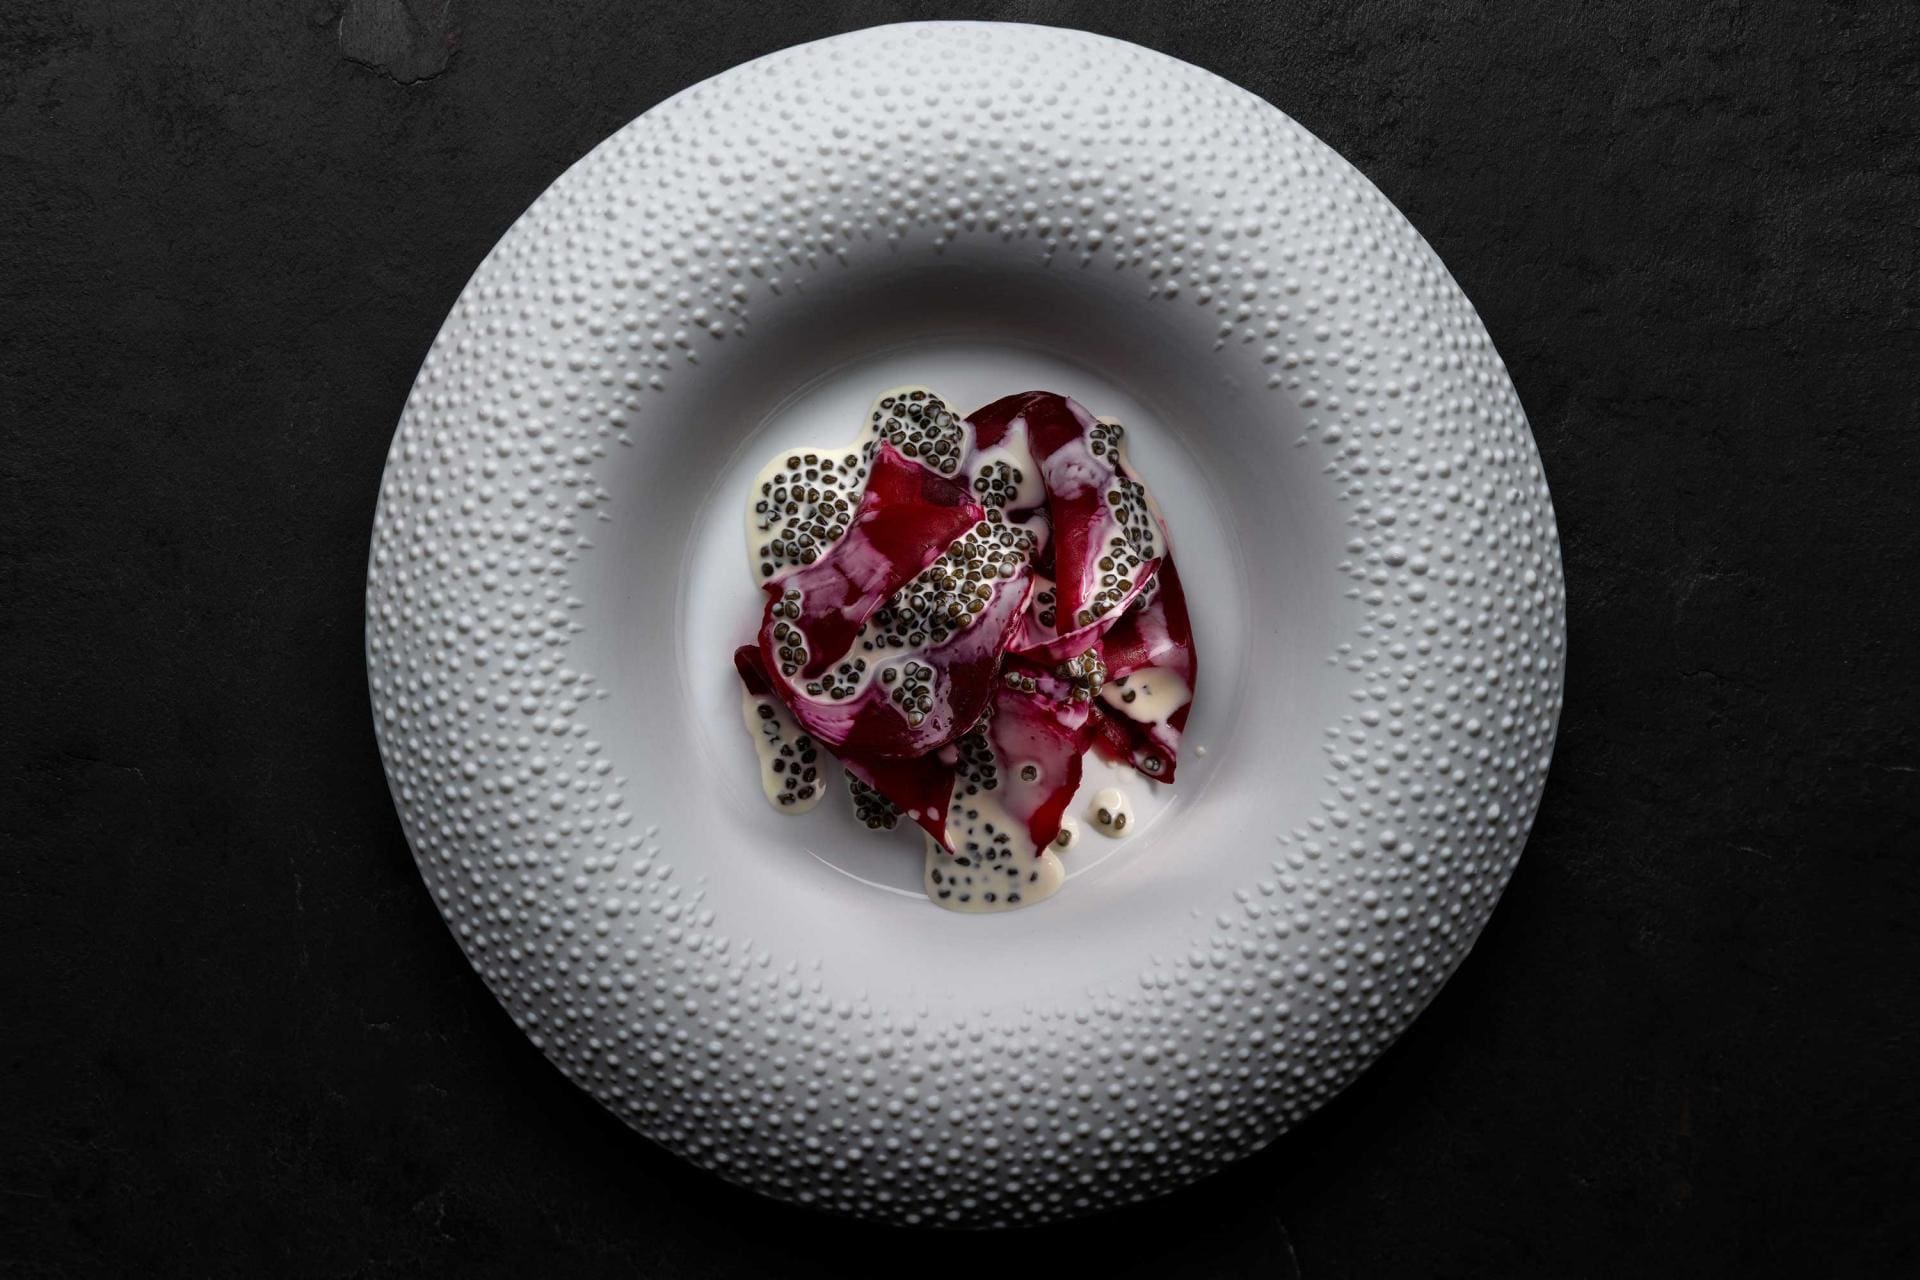 Salted beetroot with caviar at Mirazur